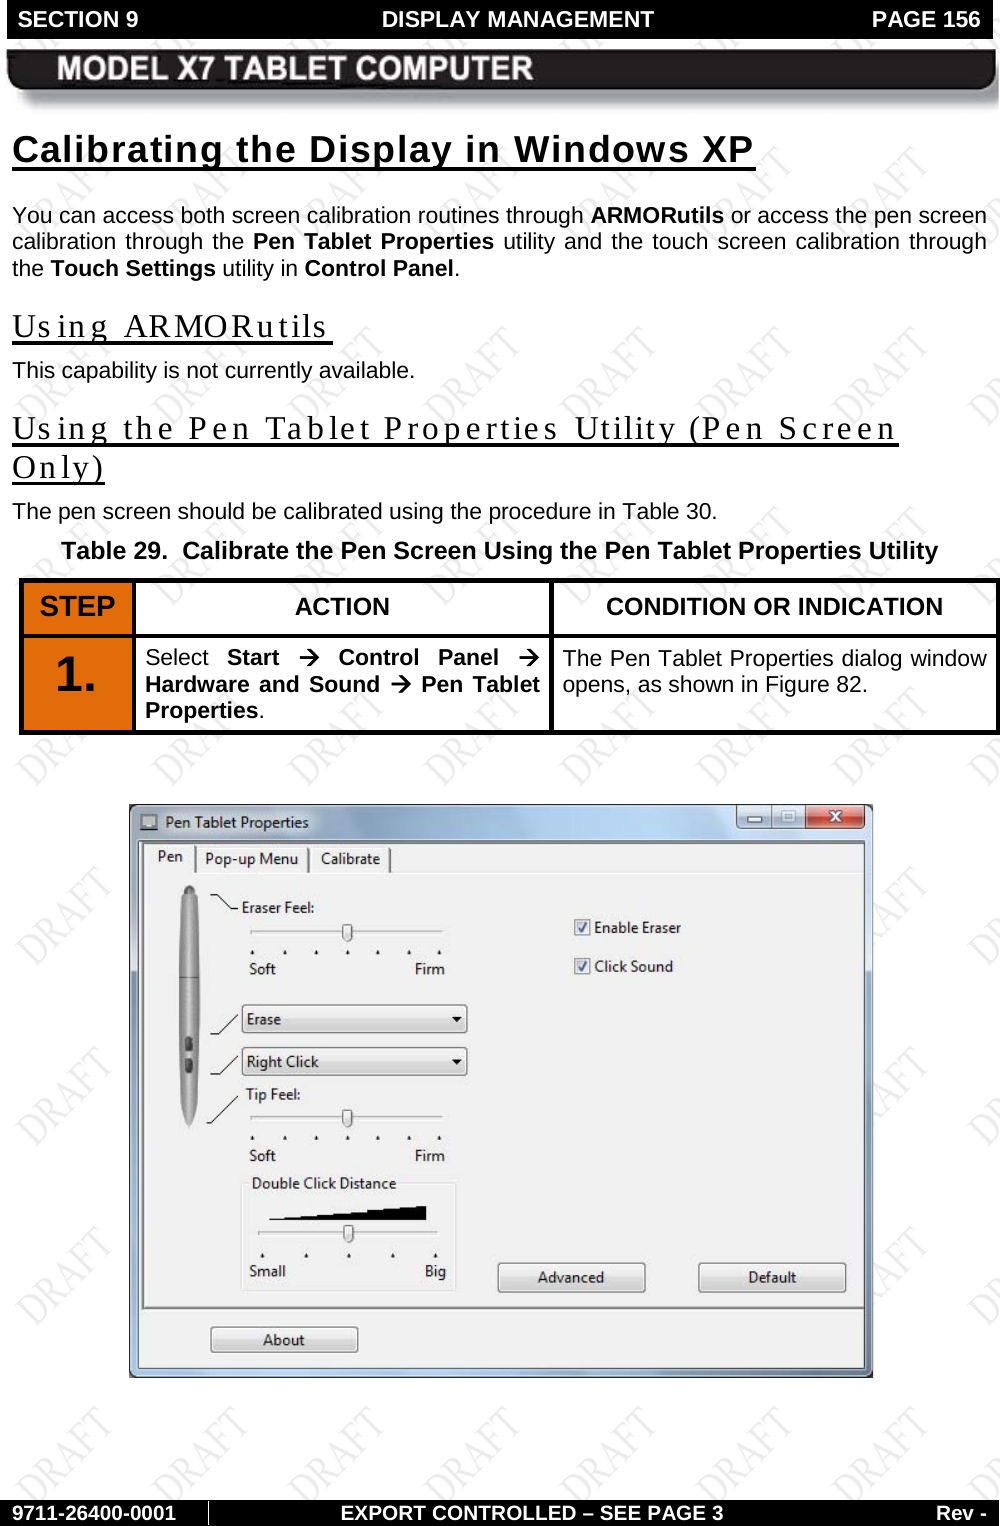 SECTION 9  DISPLAY MANAGEMENT  PAGE 156        9711-26400-0001 EXPORT CONTROLLED – SEE PAGE 3 Rev - Calibrating the Display in Windows XP You can access both screen calibration routines through ARMORutils or access the pen screen calibration through the Pen Tablet Properties utility and the touch screen calibration through the Touch Settings utility in Control Panel. Us ing ARMORutils   This capability is not currently available. Using the Pen Tablet Properties Utility (Pen Screen Only) The pen screen should be calibrated using the procedure in Table 30.  Table 29.  Calibrate the Pen Screen Using the Pen Tablet Properties Utility STEP  ACTION CONDITION OR INDICATION 1.   Select  Start à Control Panel à Hardware and Sound à Pen Tablet Properties.  The Pen Tablet Properties dialog window opens, as shown in Figure 82.   